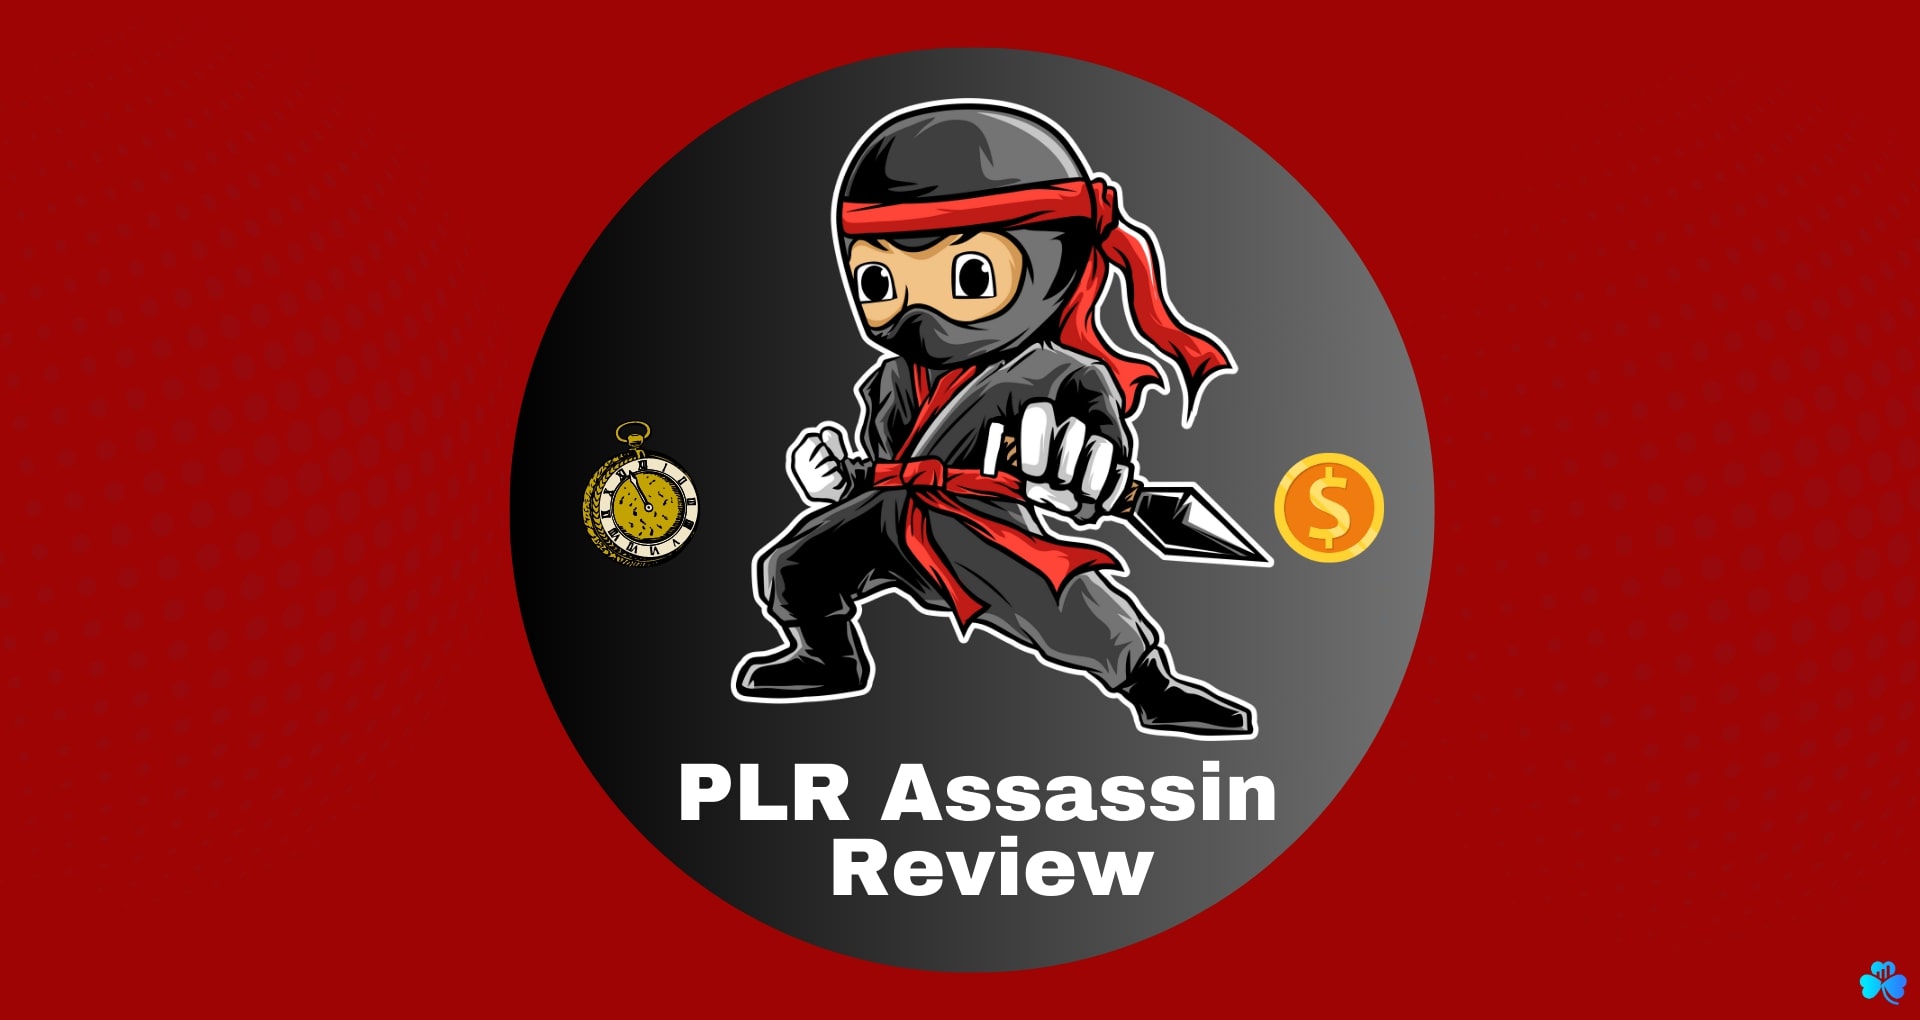 plr assassin review- graphics of ninja on red background